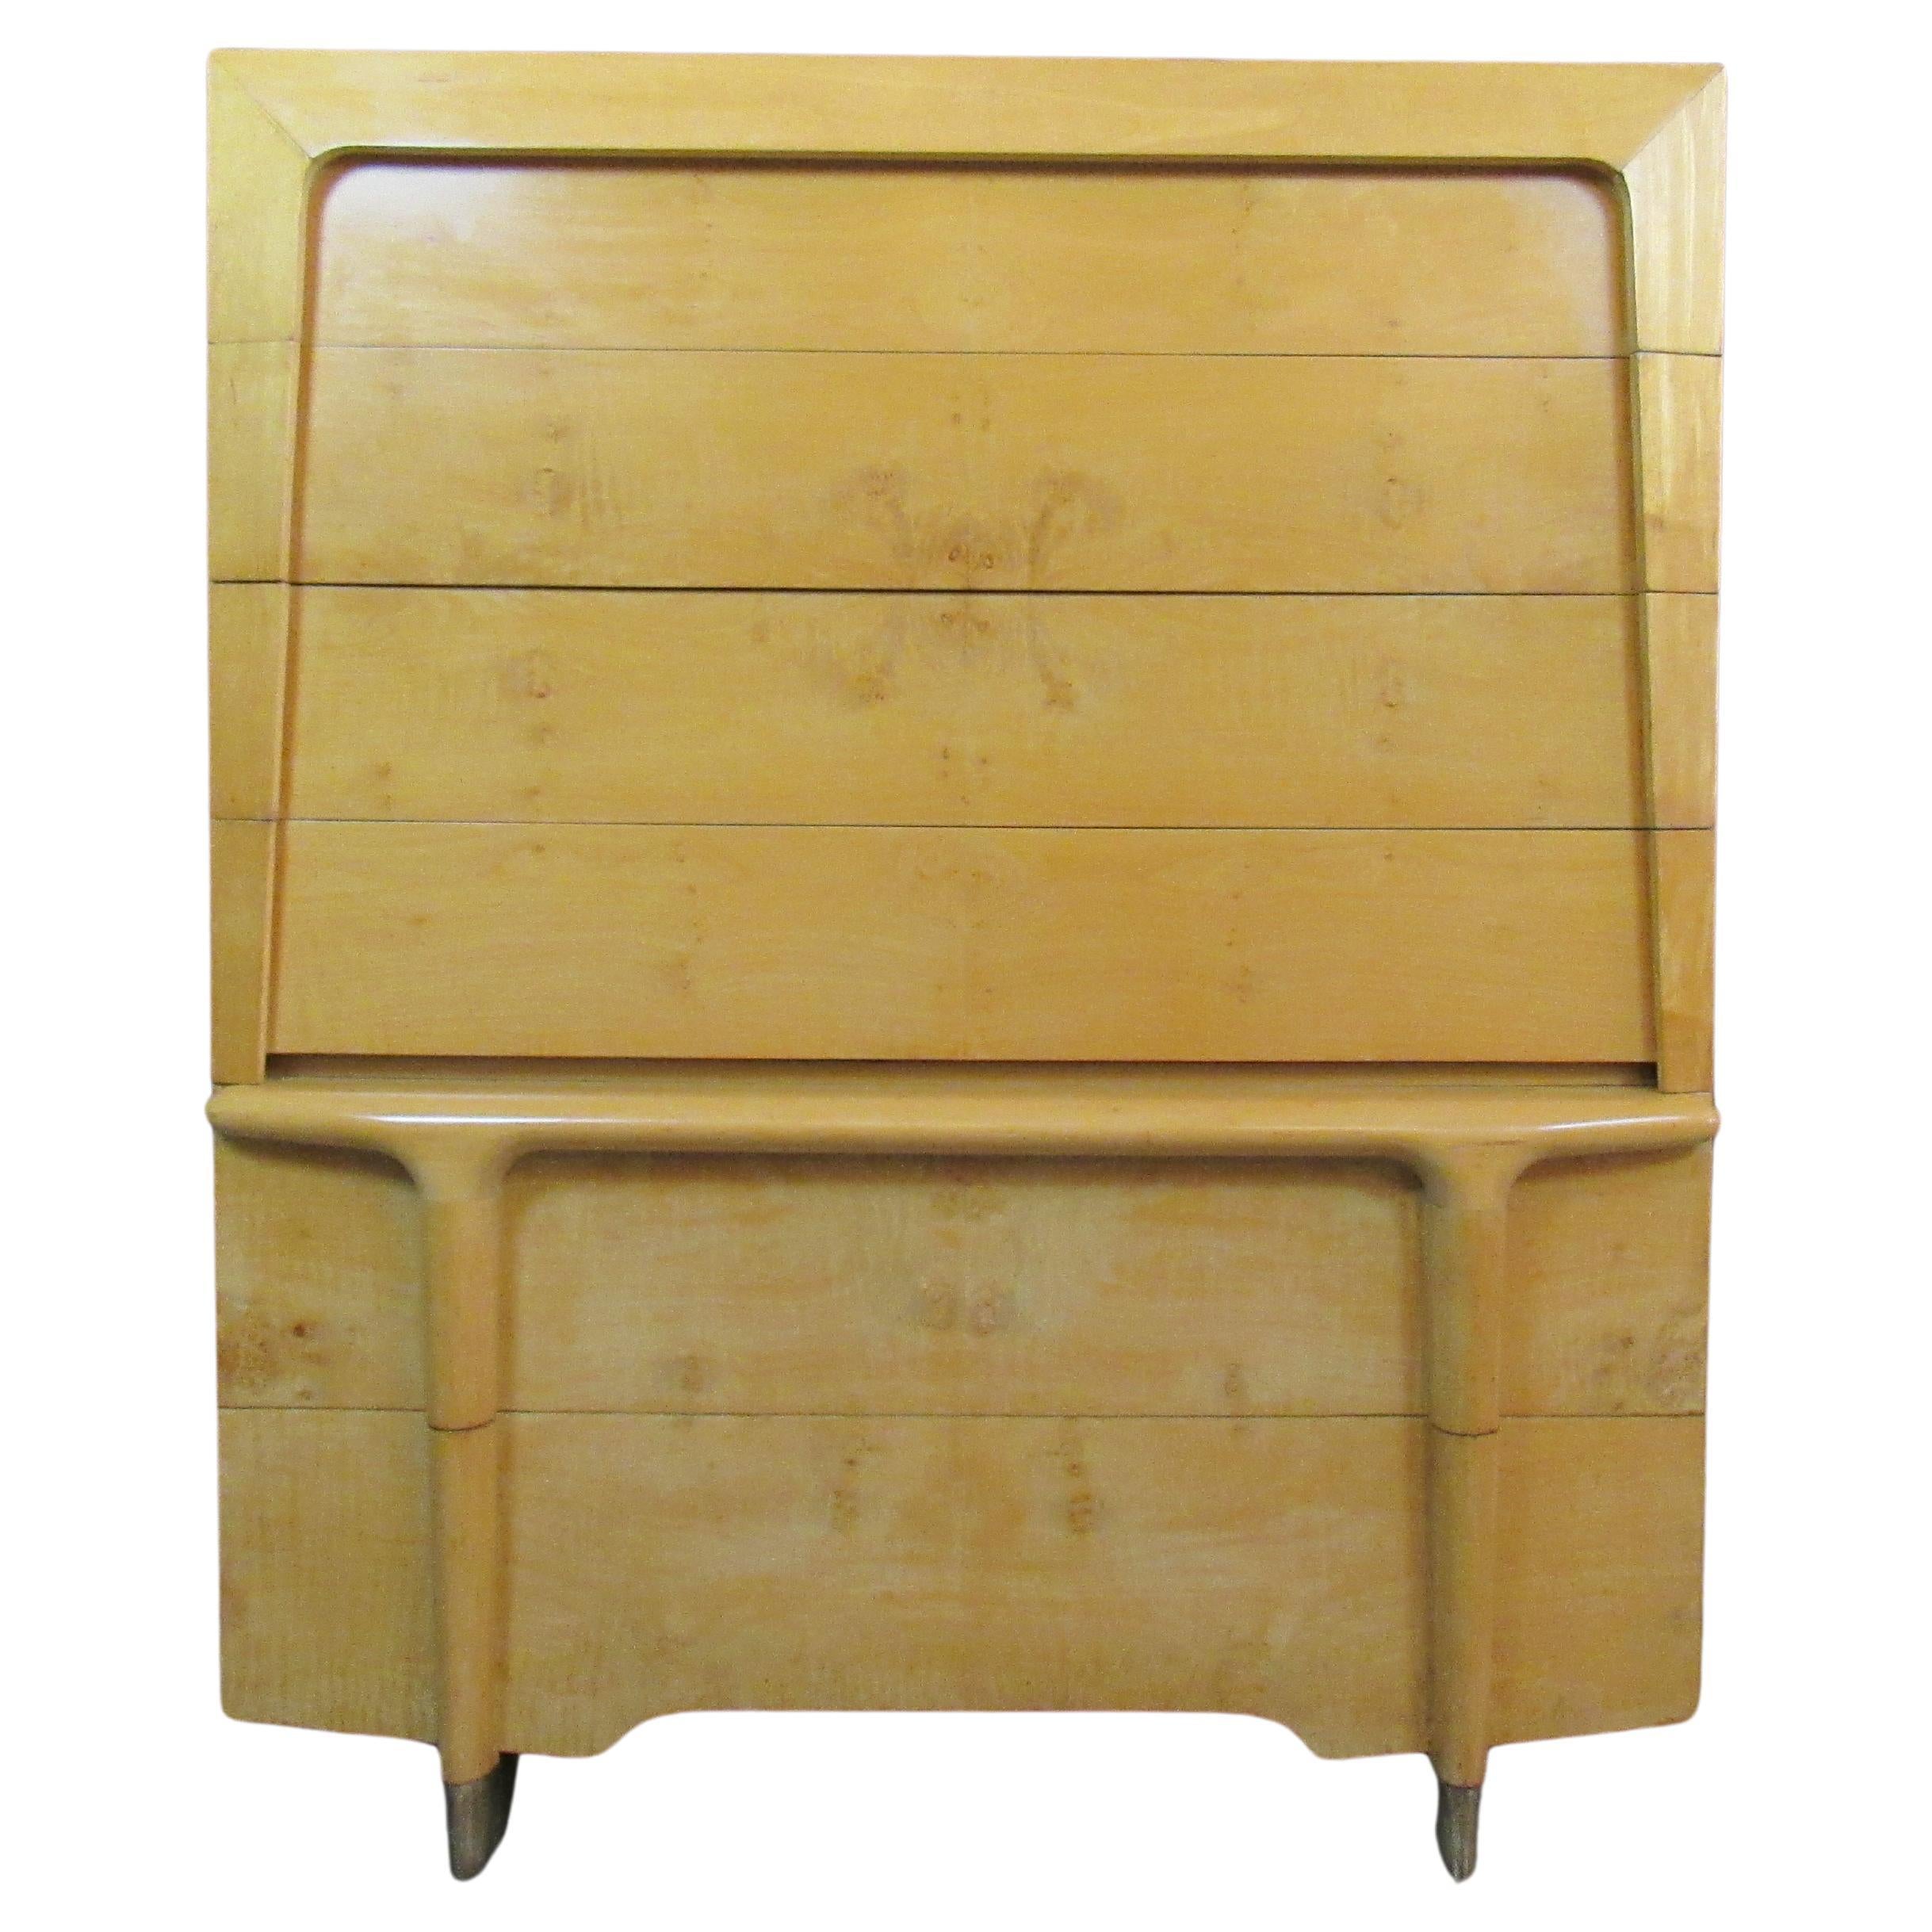 Burled Maple and Brass HiBoy Dresser after Heywood Wakefield